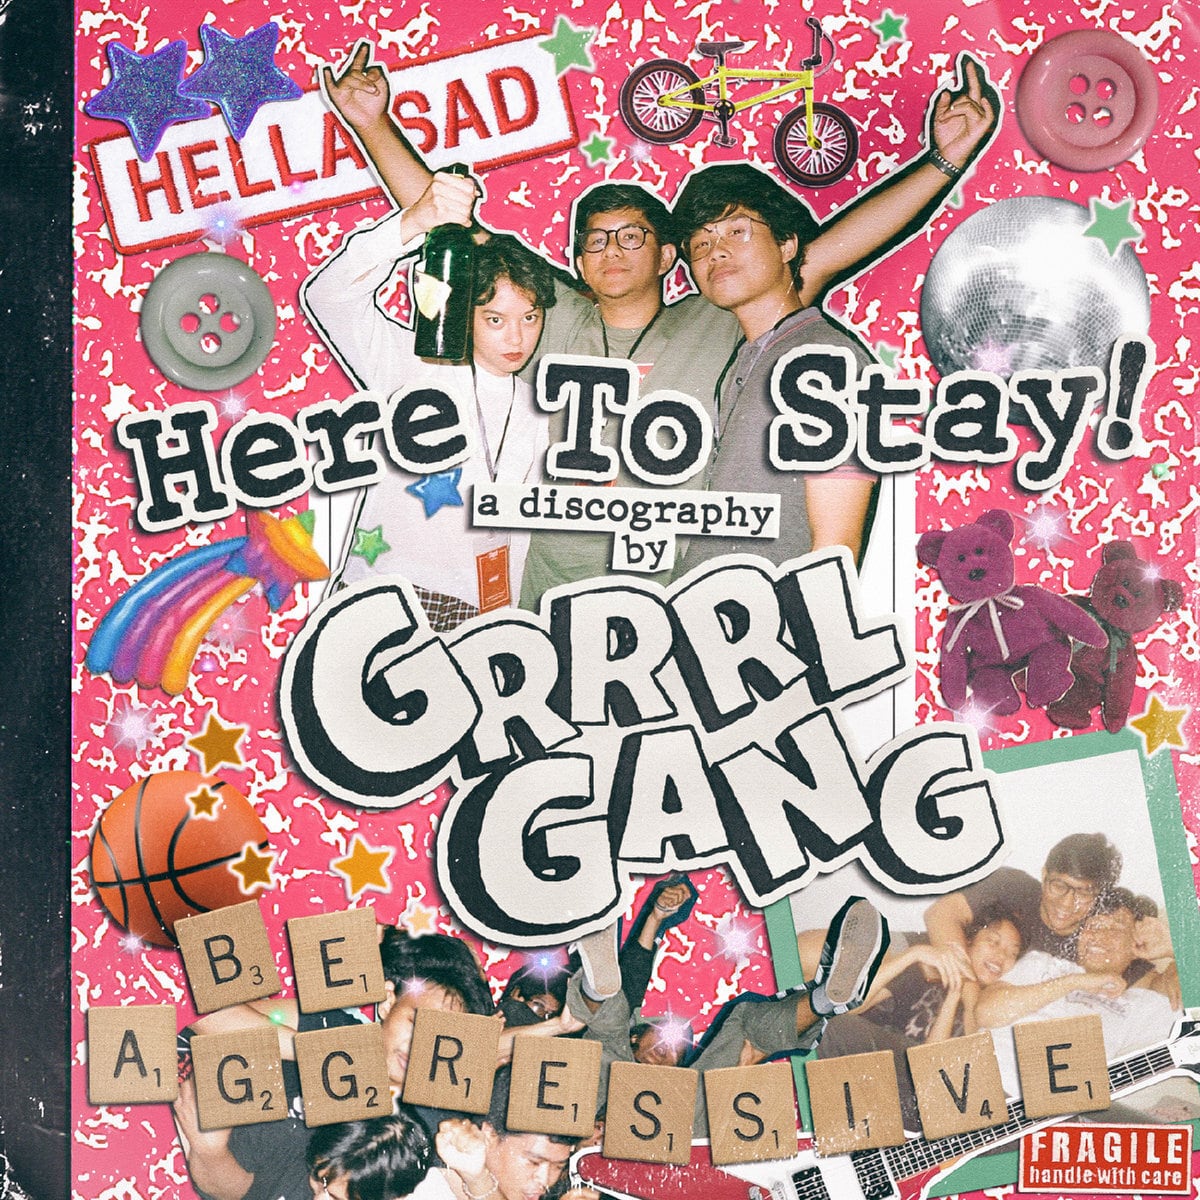 Grrrl Gang  / Here to stay!（Ltd Solid Lilac LP）